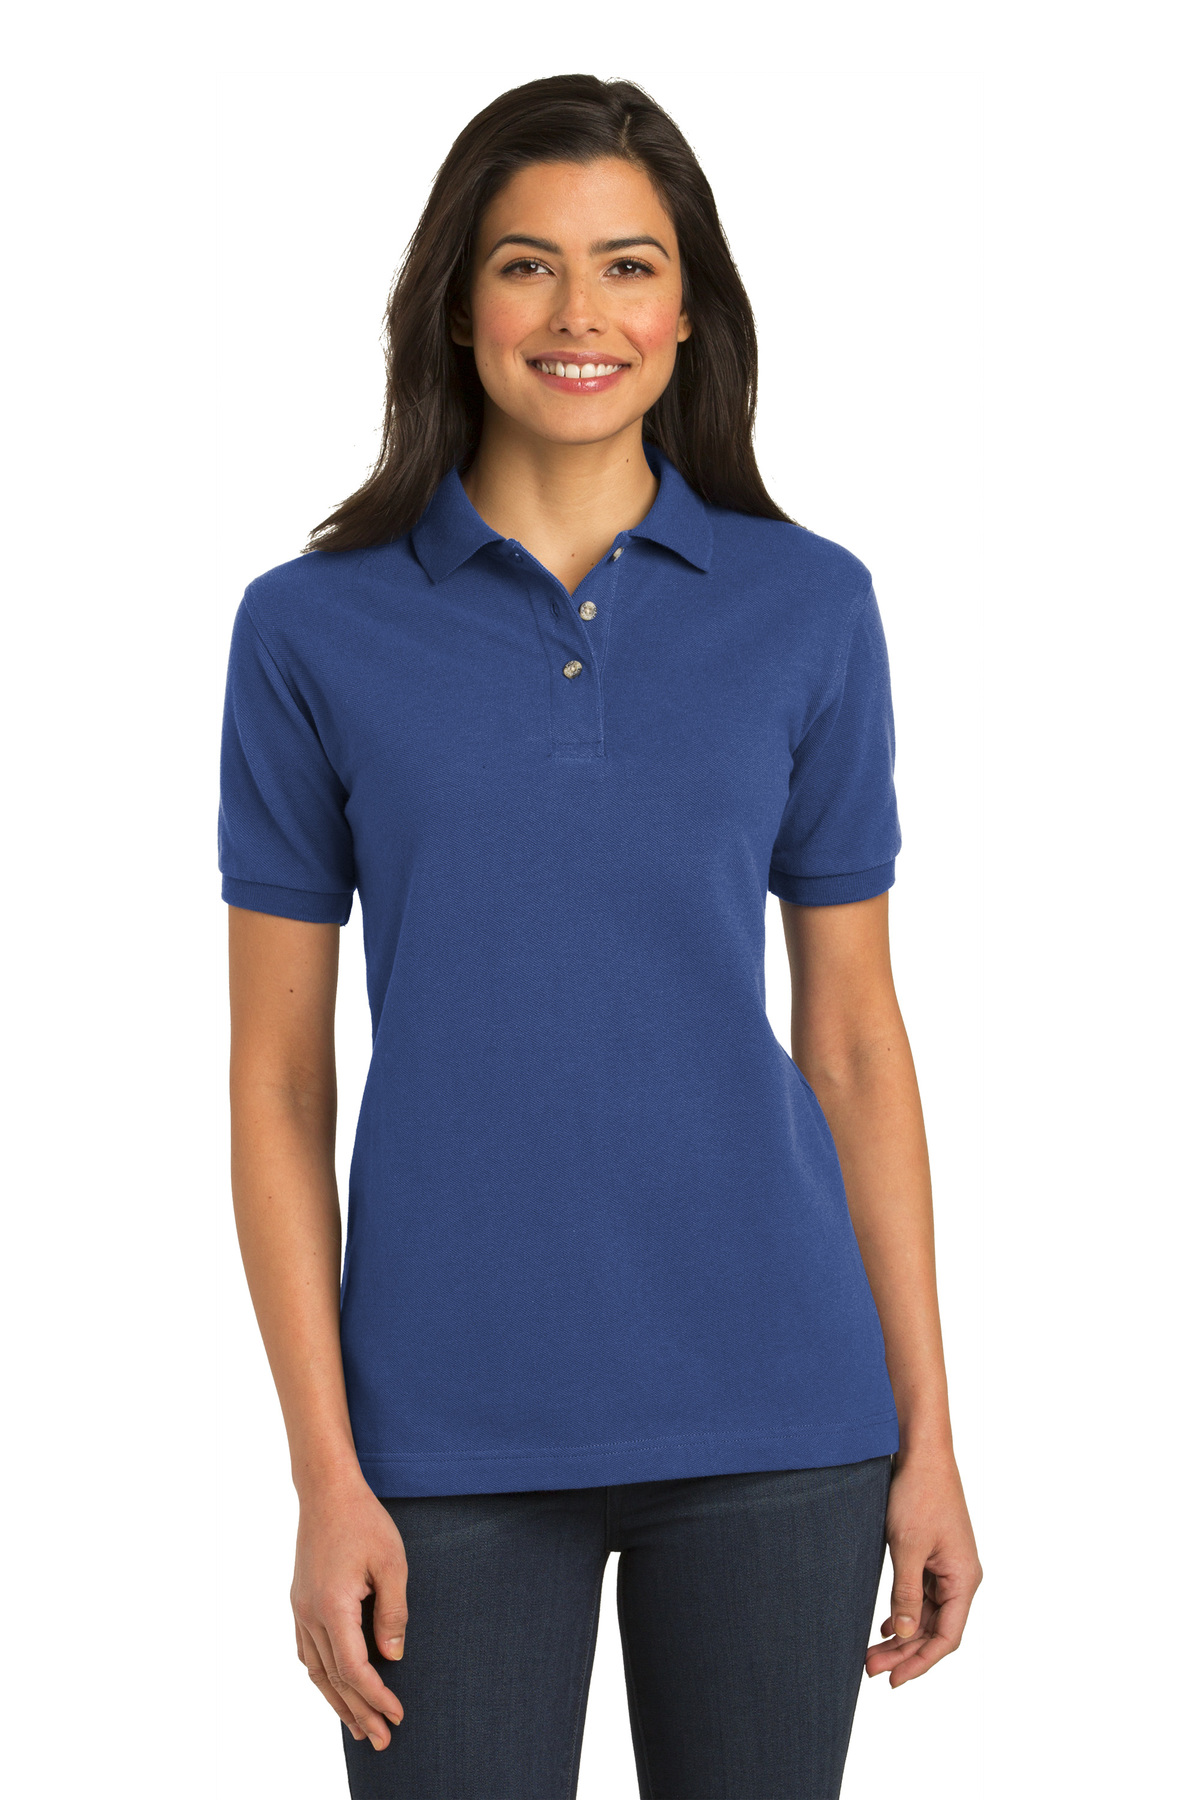 Port Authority Ladies Heavyweight Cotton Pique Polo | Product | Port ...